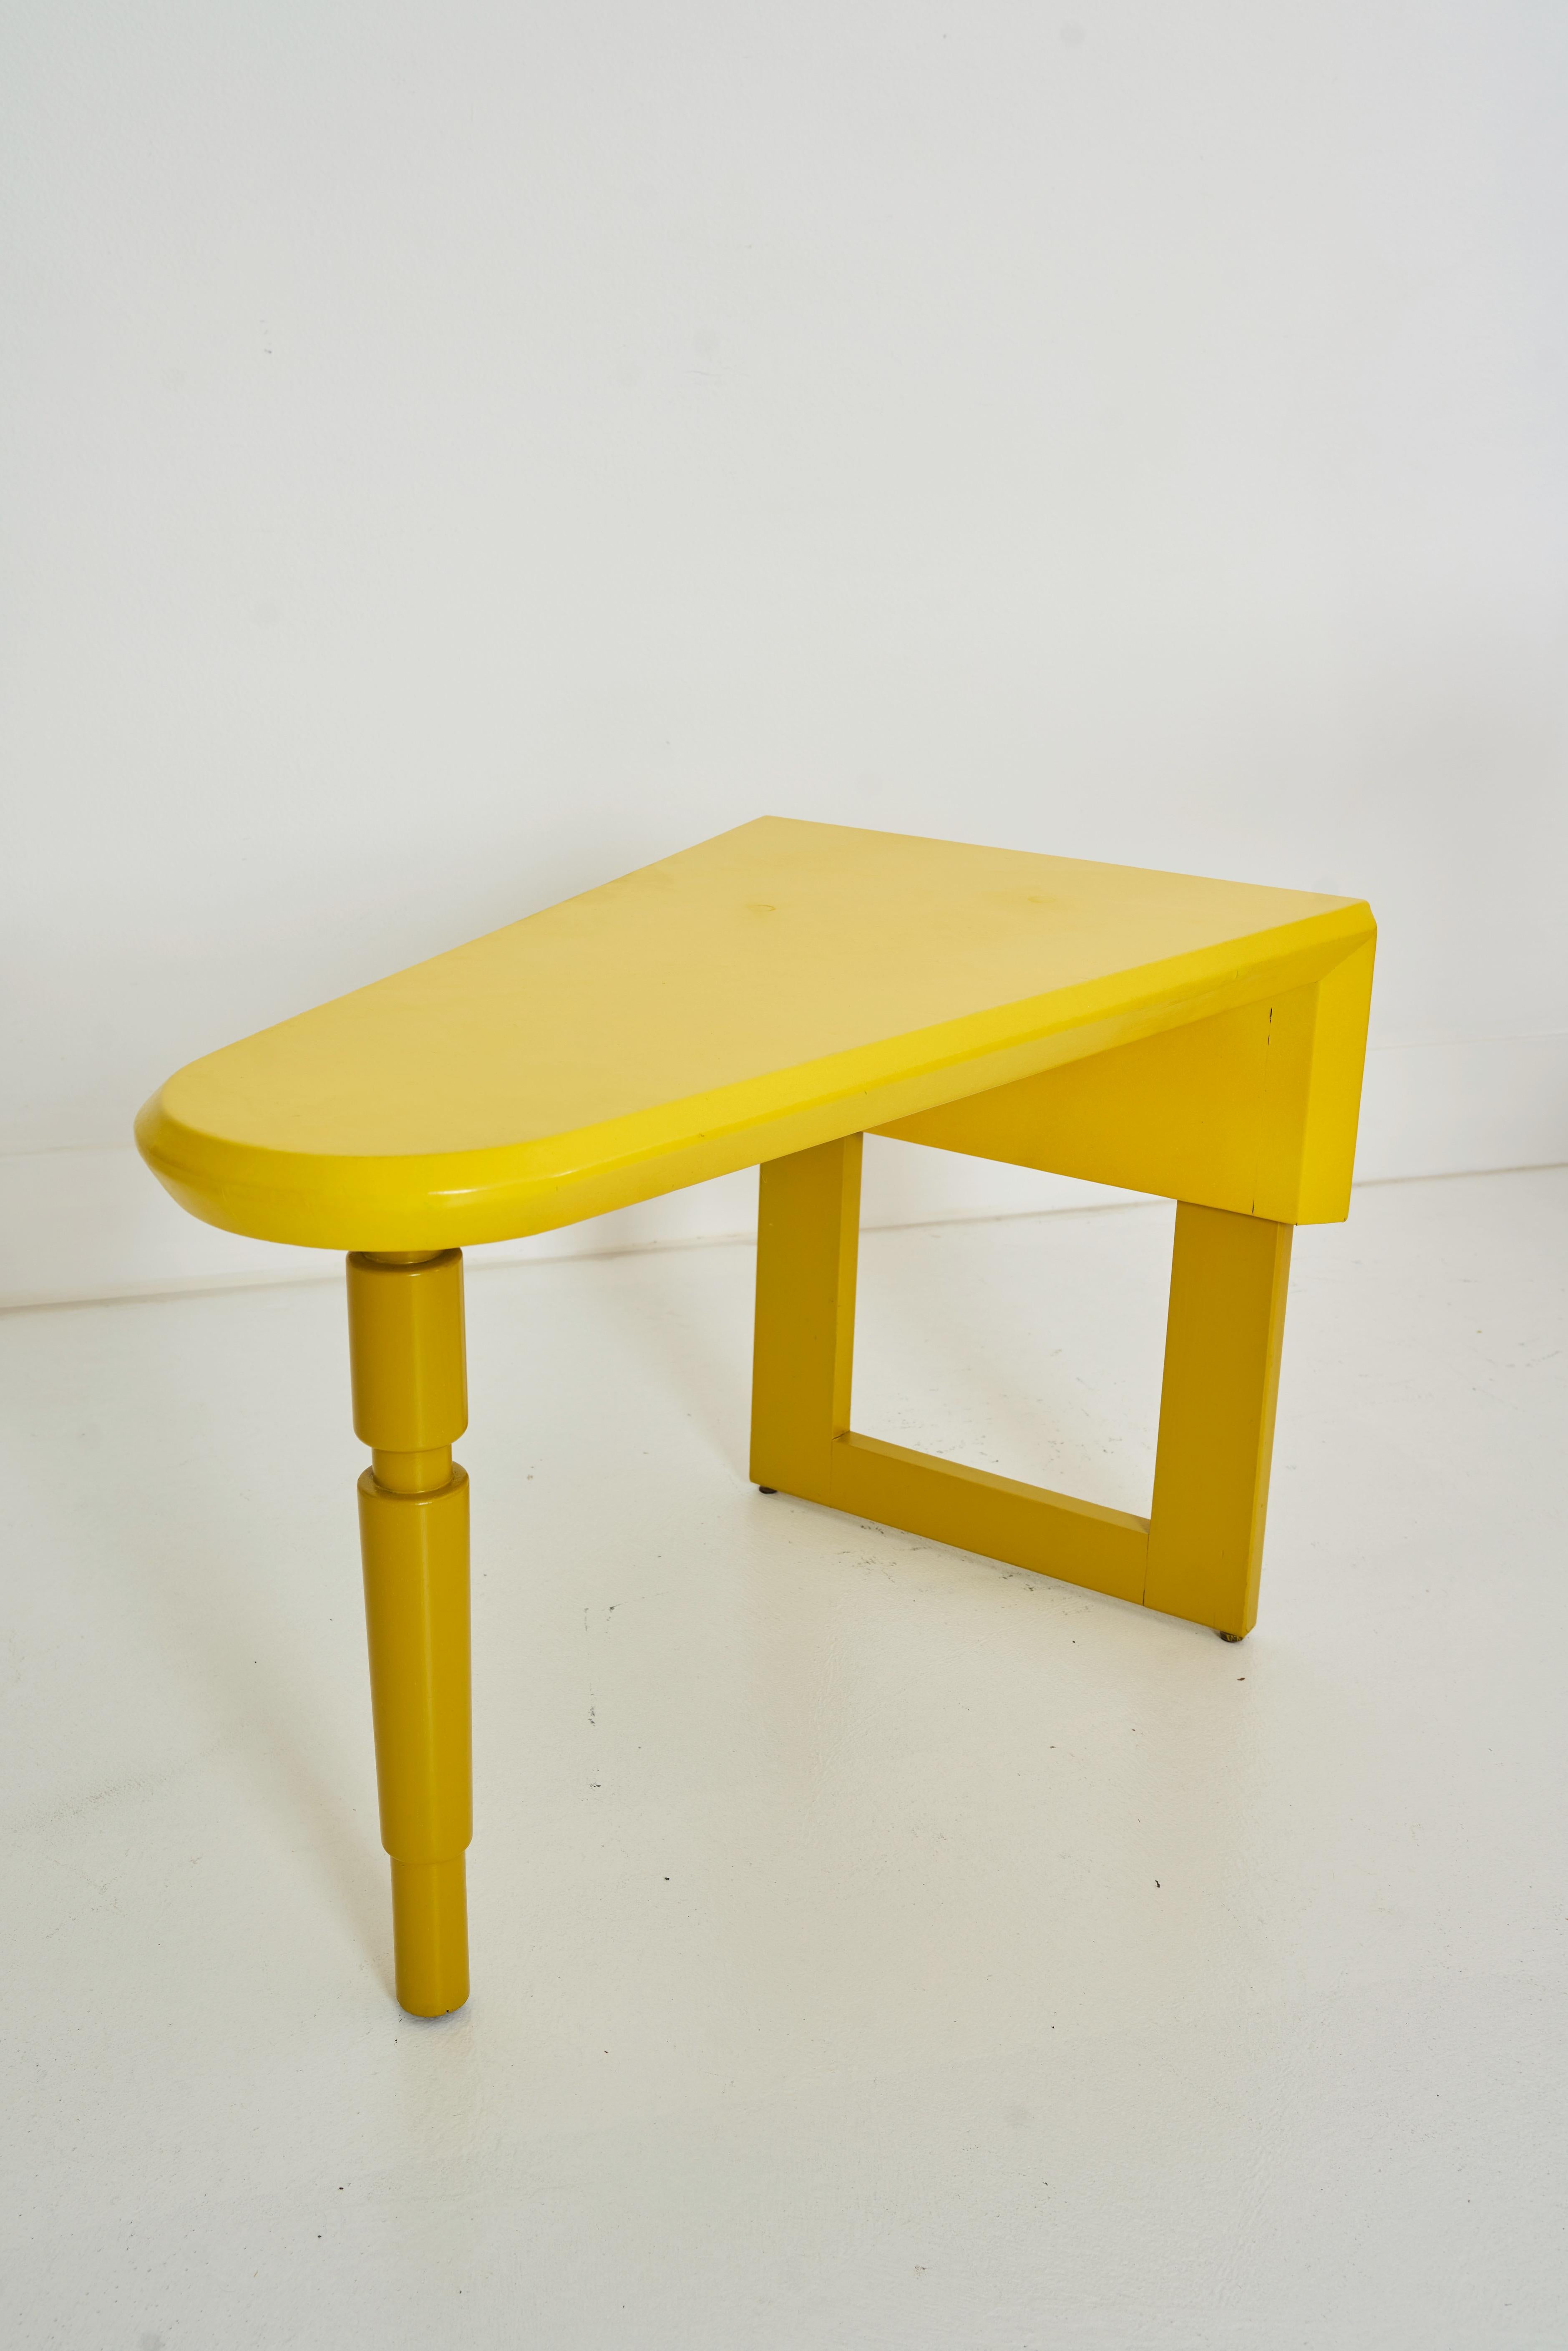 Painted A Unique Yellow Leather Wrapped Side Table by William Haines